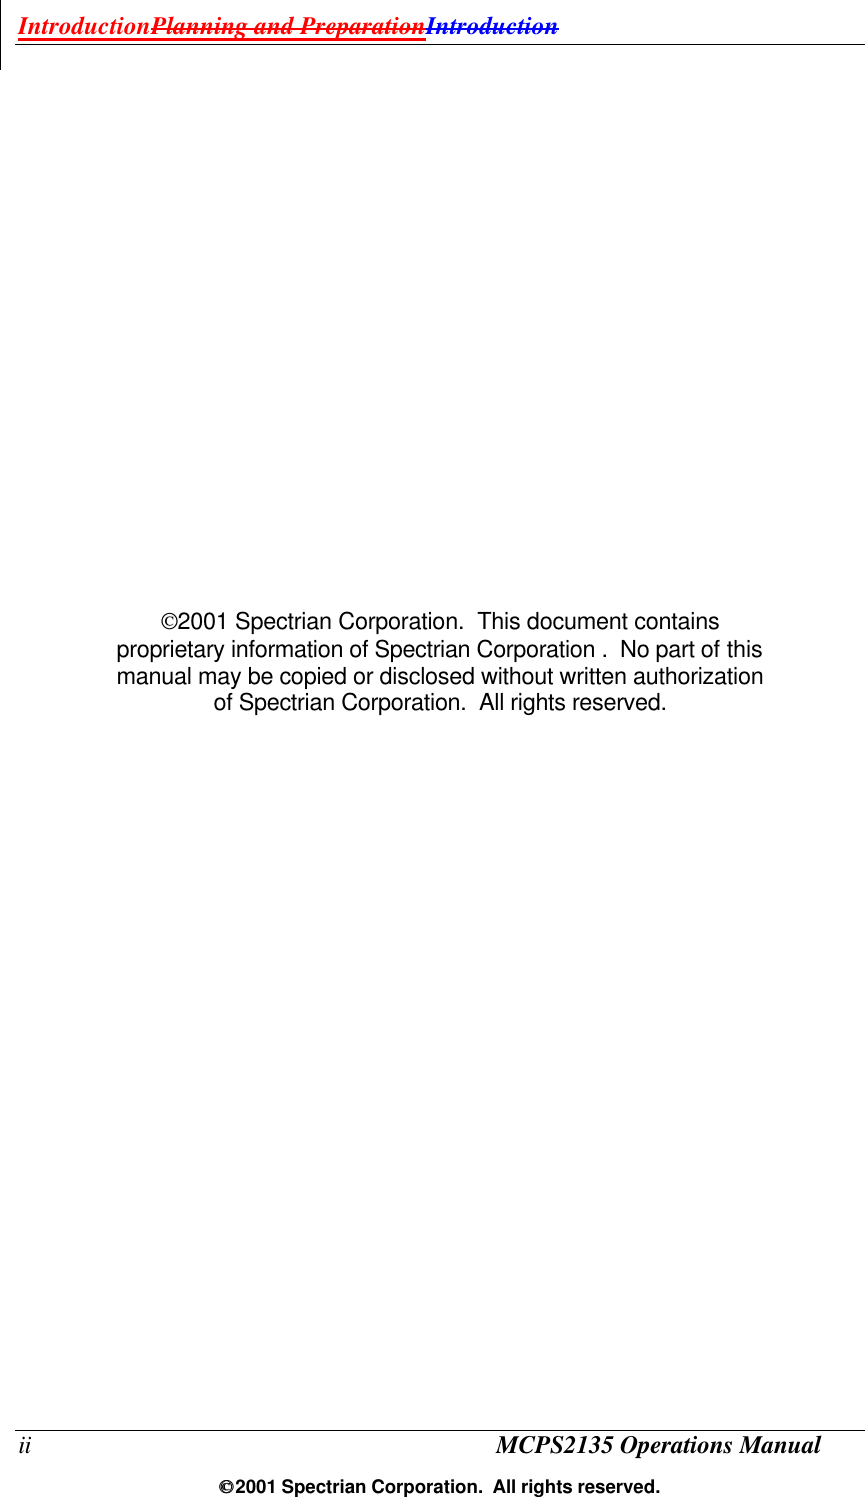 IntroductionPlanning and PreparationIntroduction ii MCPS2135 Operations Manual  2001 Spectrian Corporation.  All rights reserved.                    2001 Spectrian Corporation.  This document contains proprietary information of Spectrian Corporation .  No part of this manual may be copied or disclosed without written authorization of Spectrian Corporation.  All rights reserved. 